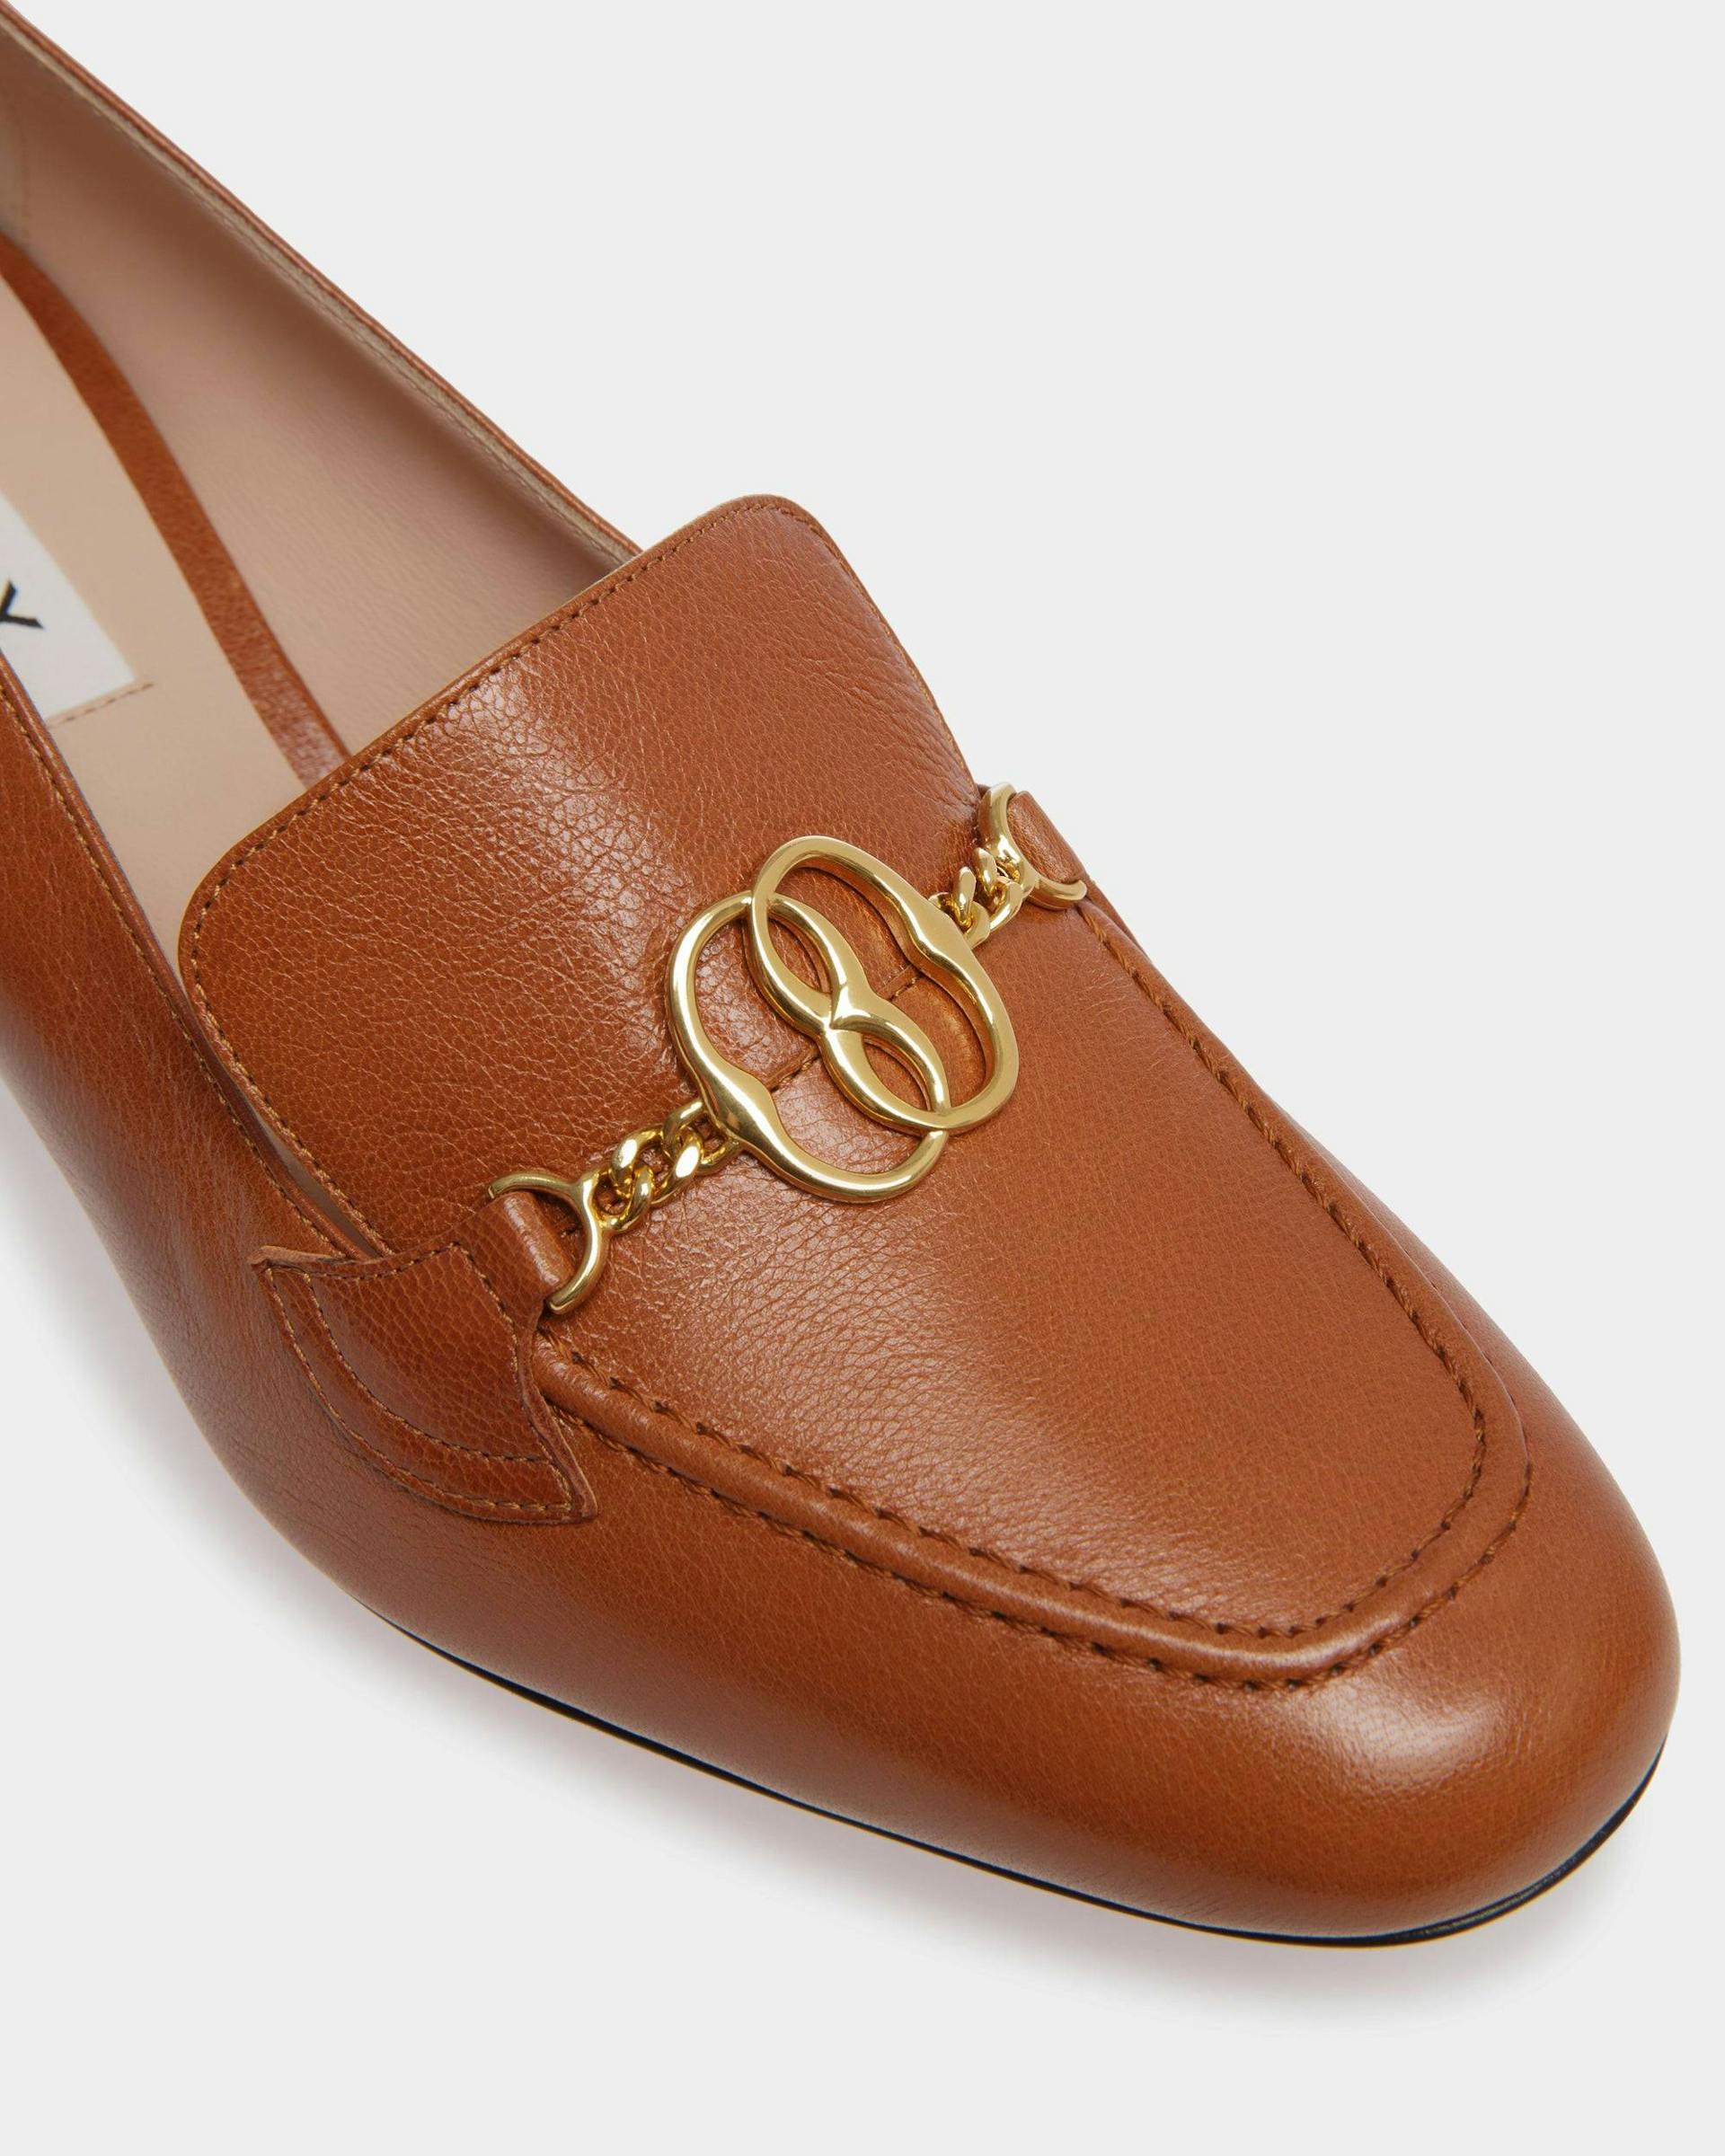 Women's Emblem Pumps In Brown Leather | Bally | Still Life Detail